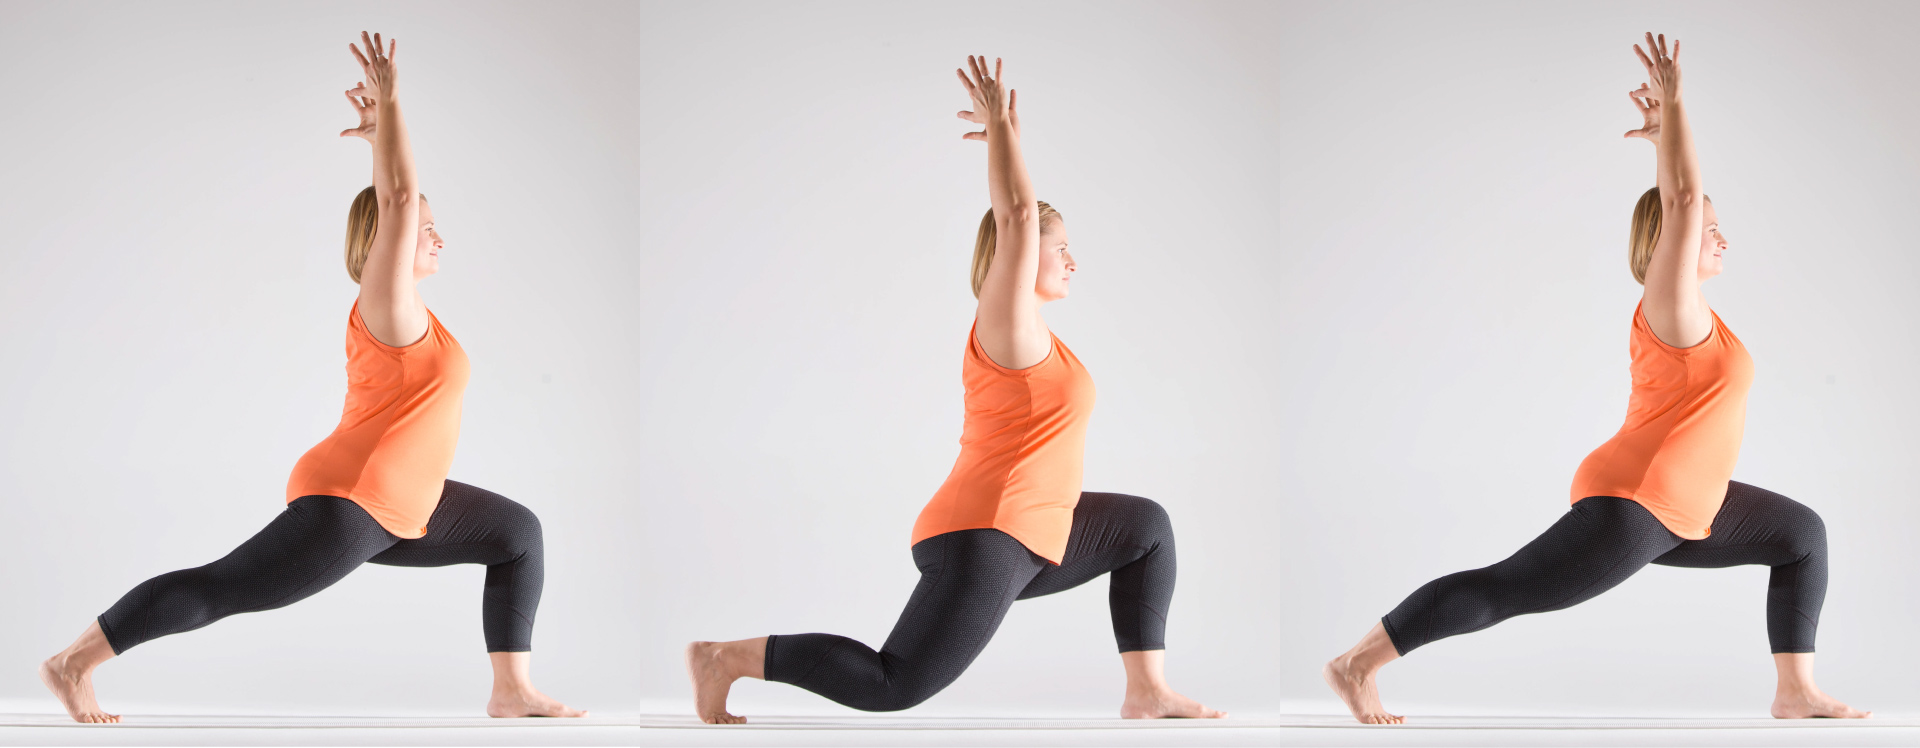 Hatha Yoga Sequence: Best Structure - Yoga Poses 4 You